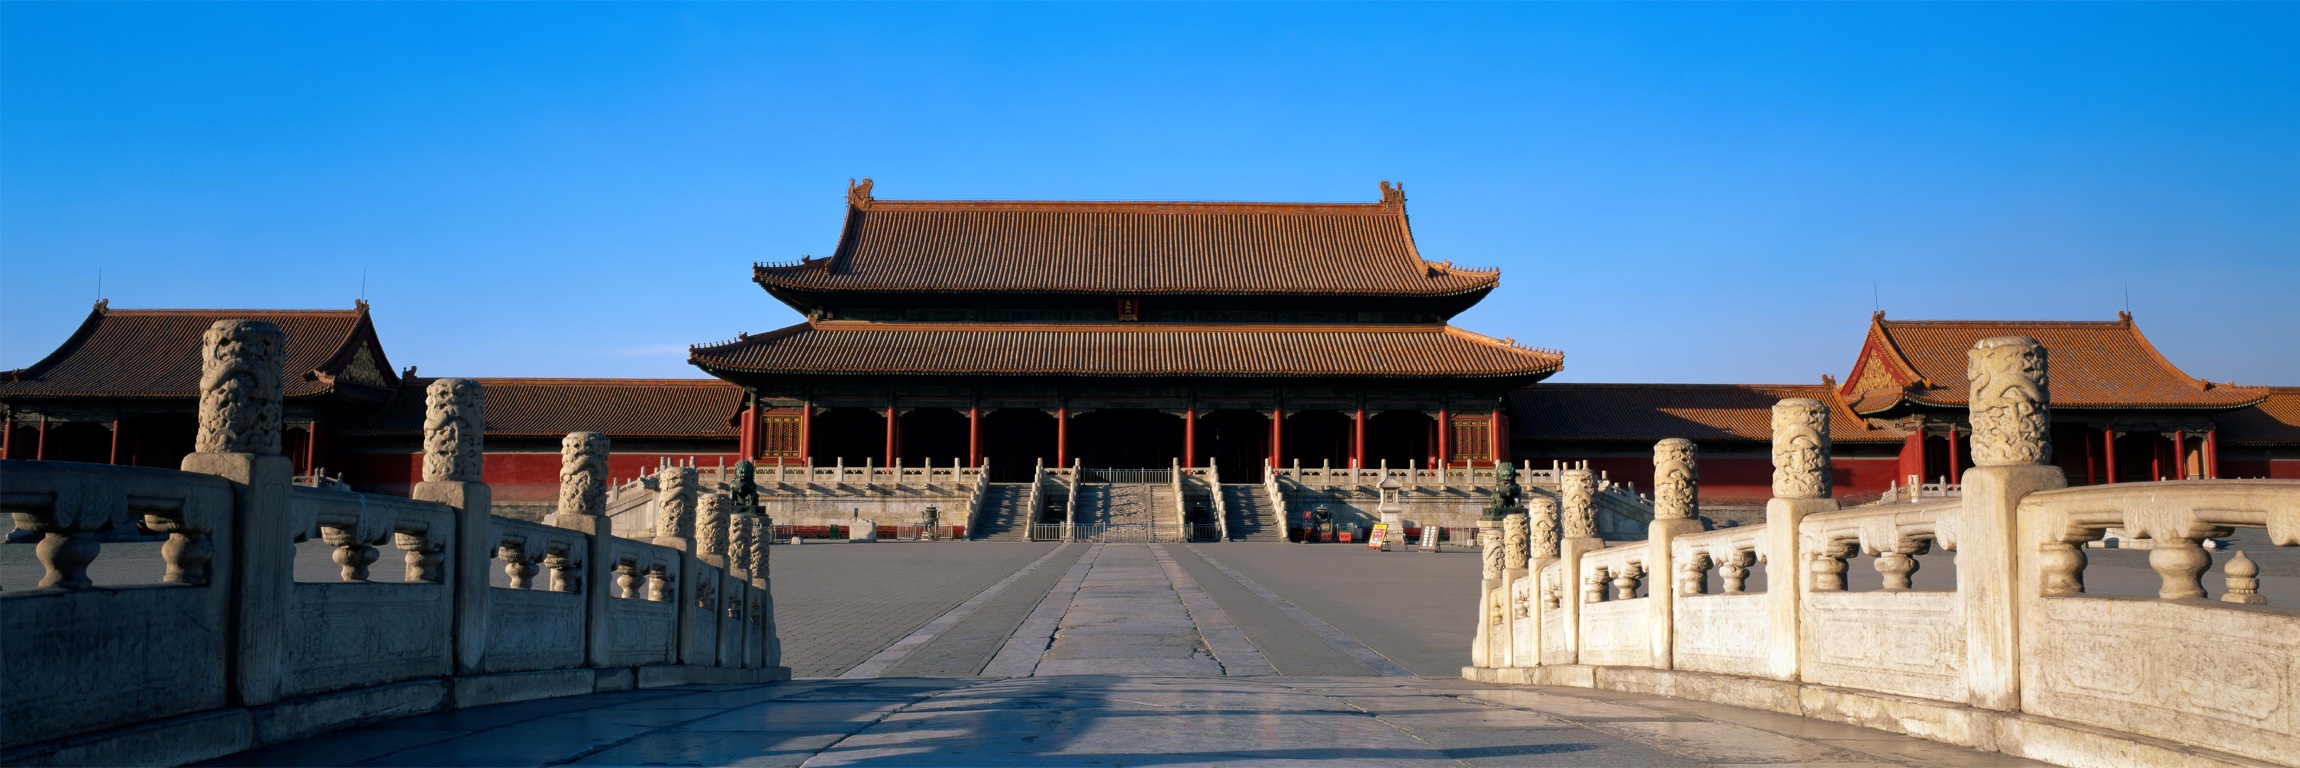 China Beijing Imperial Palace Wallpaper X